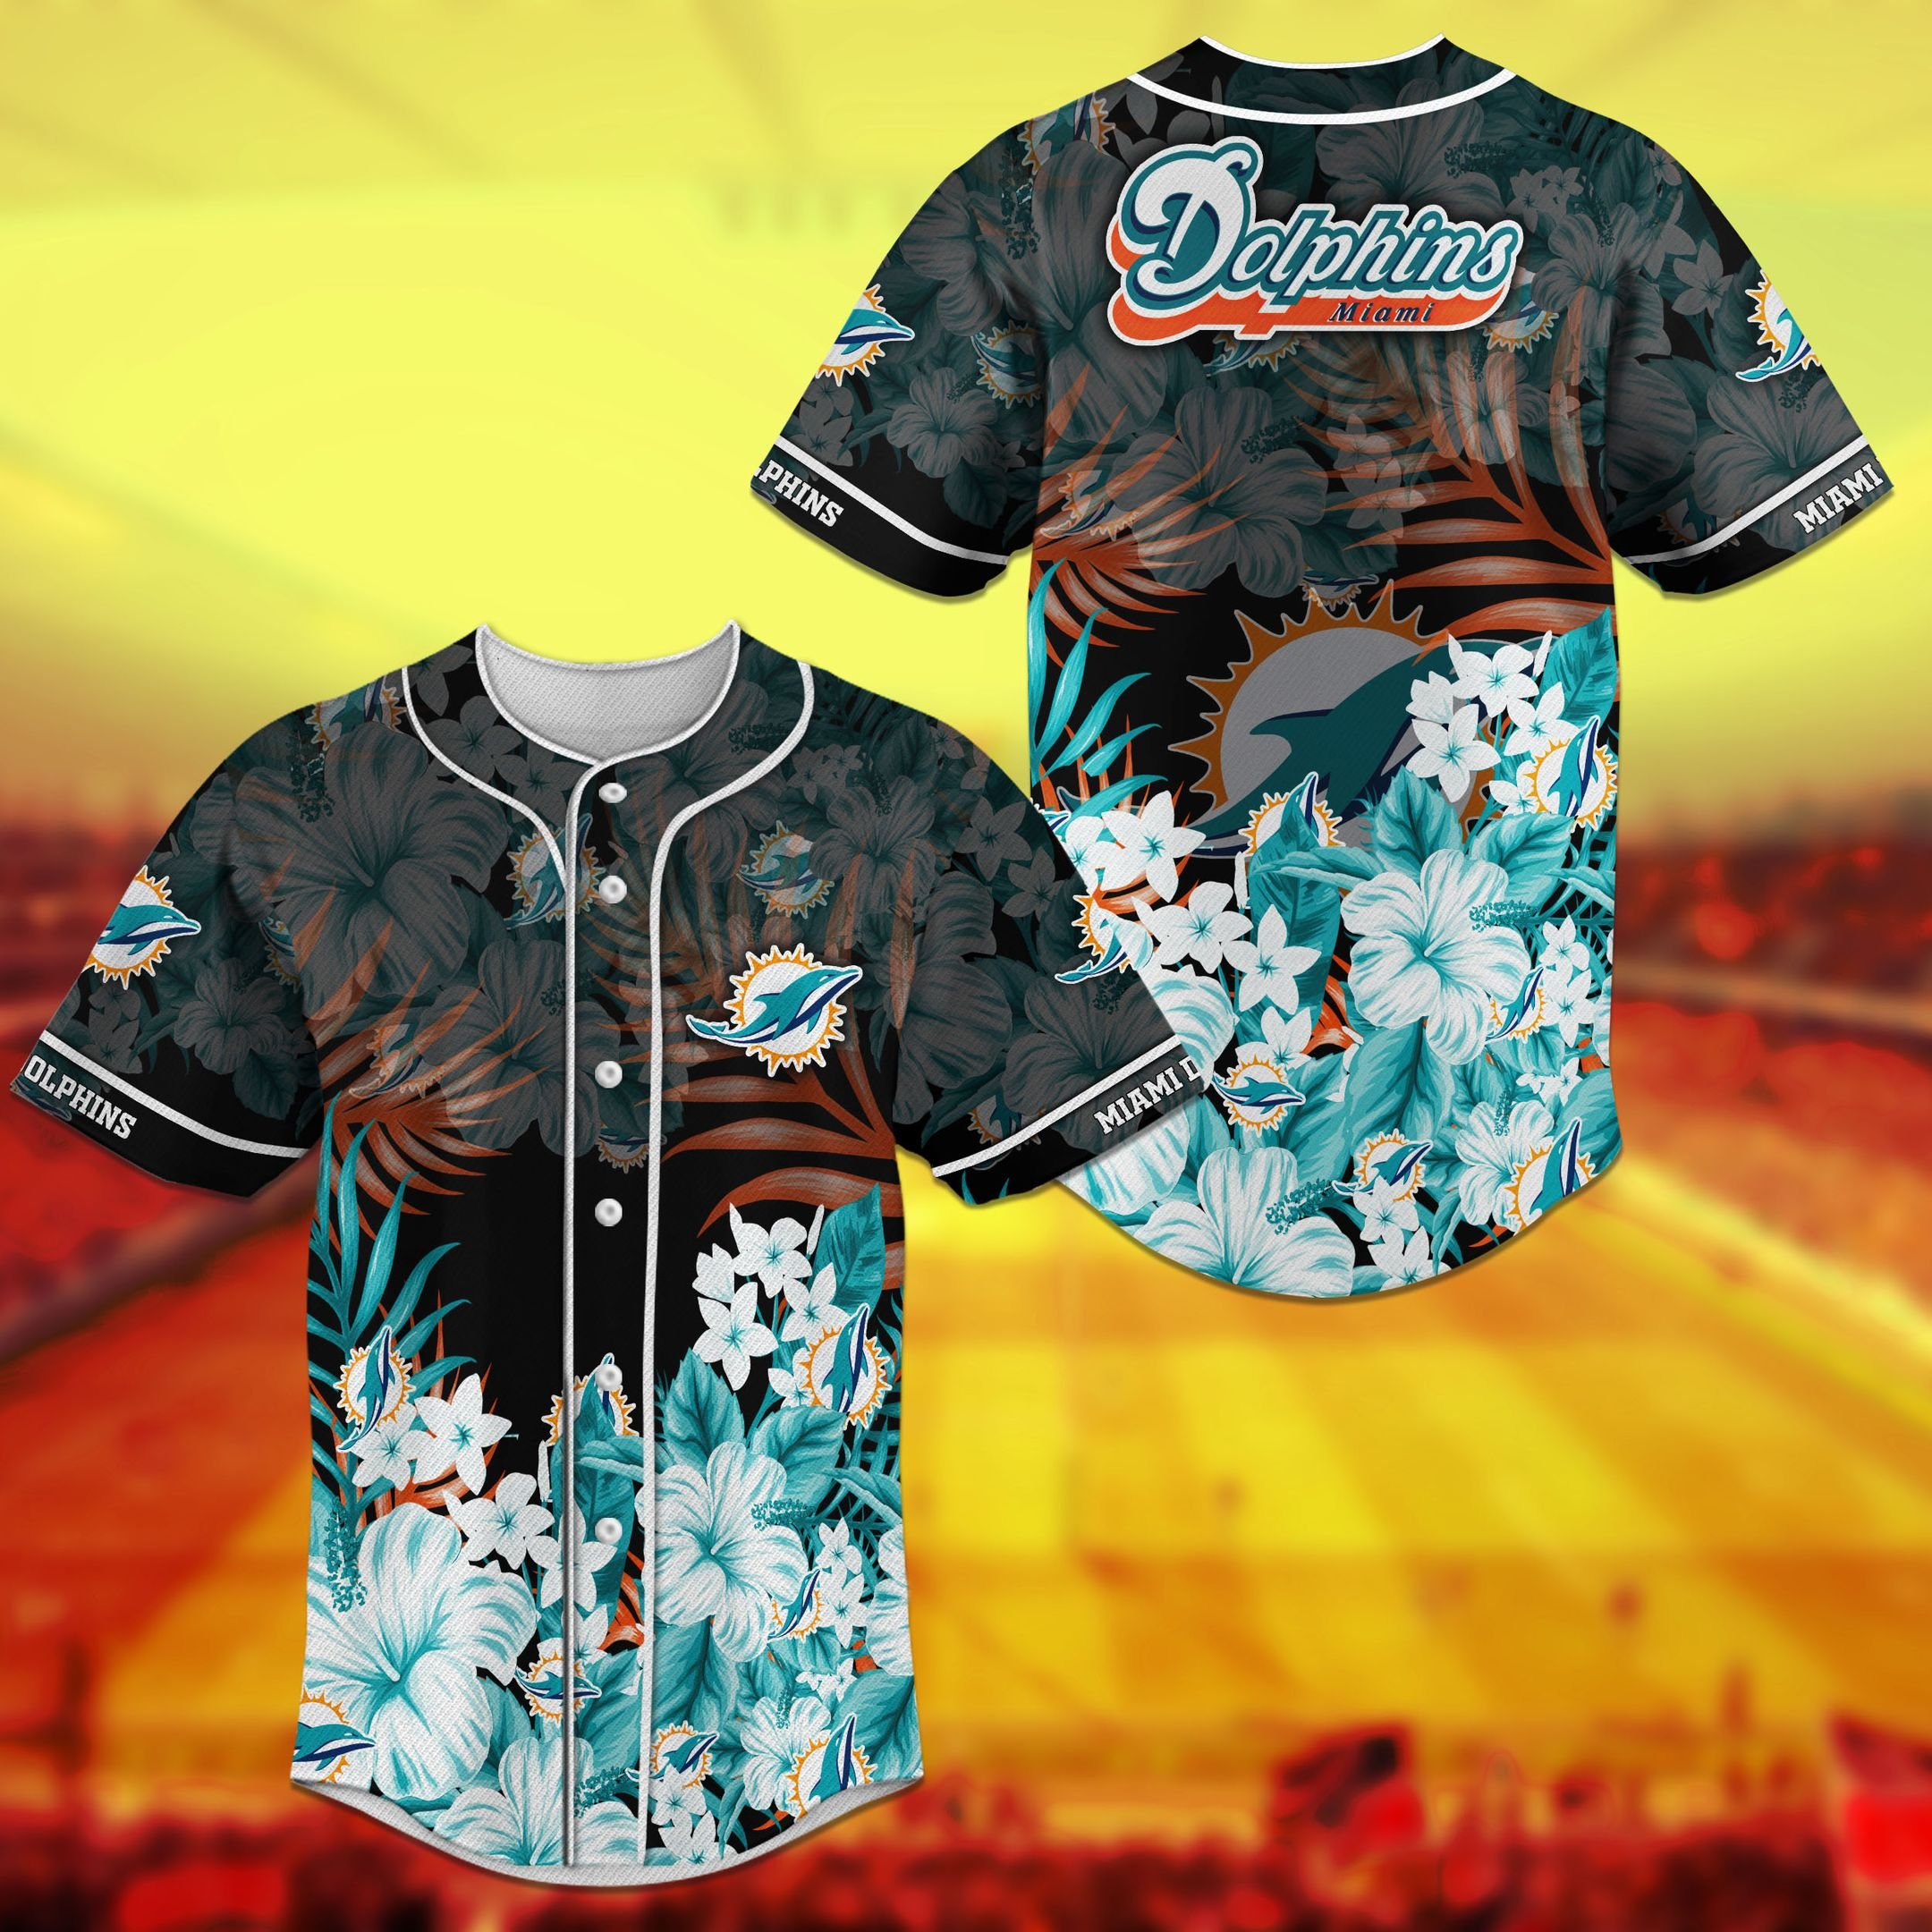 Miami Dolphins NFL baseball Jersey Shirt Floral